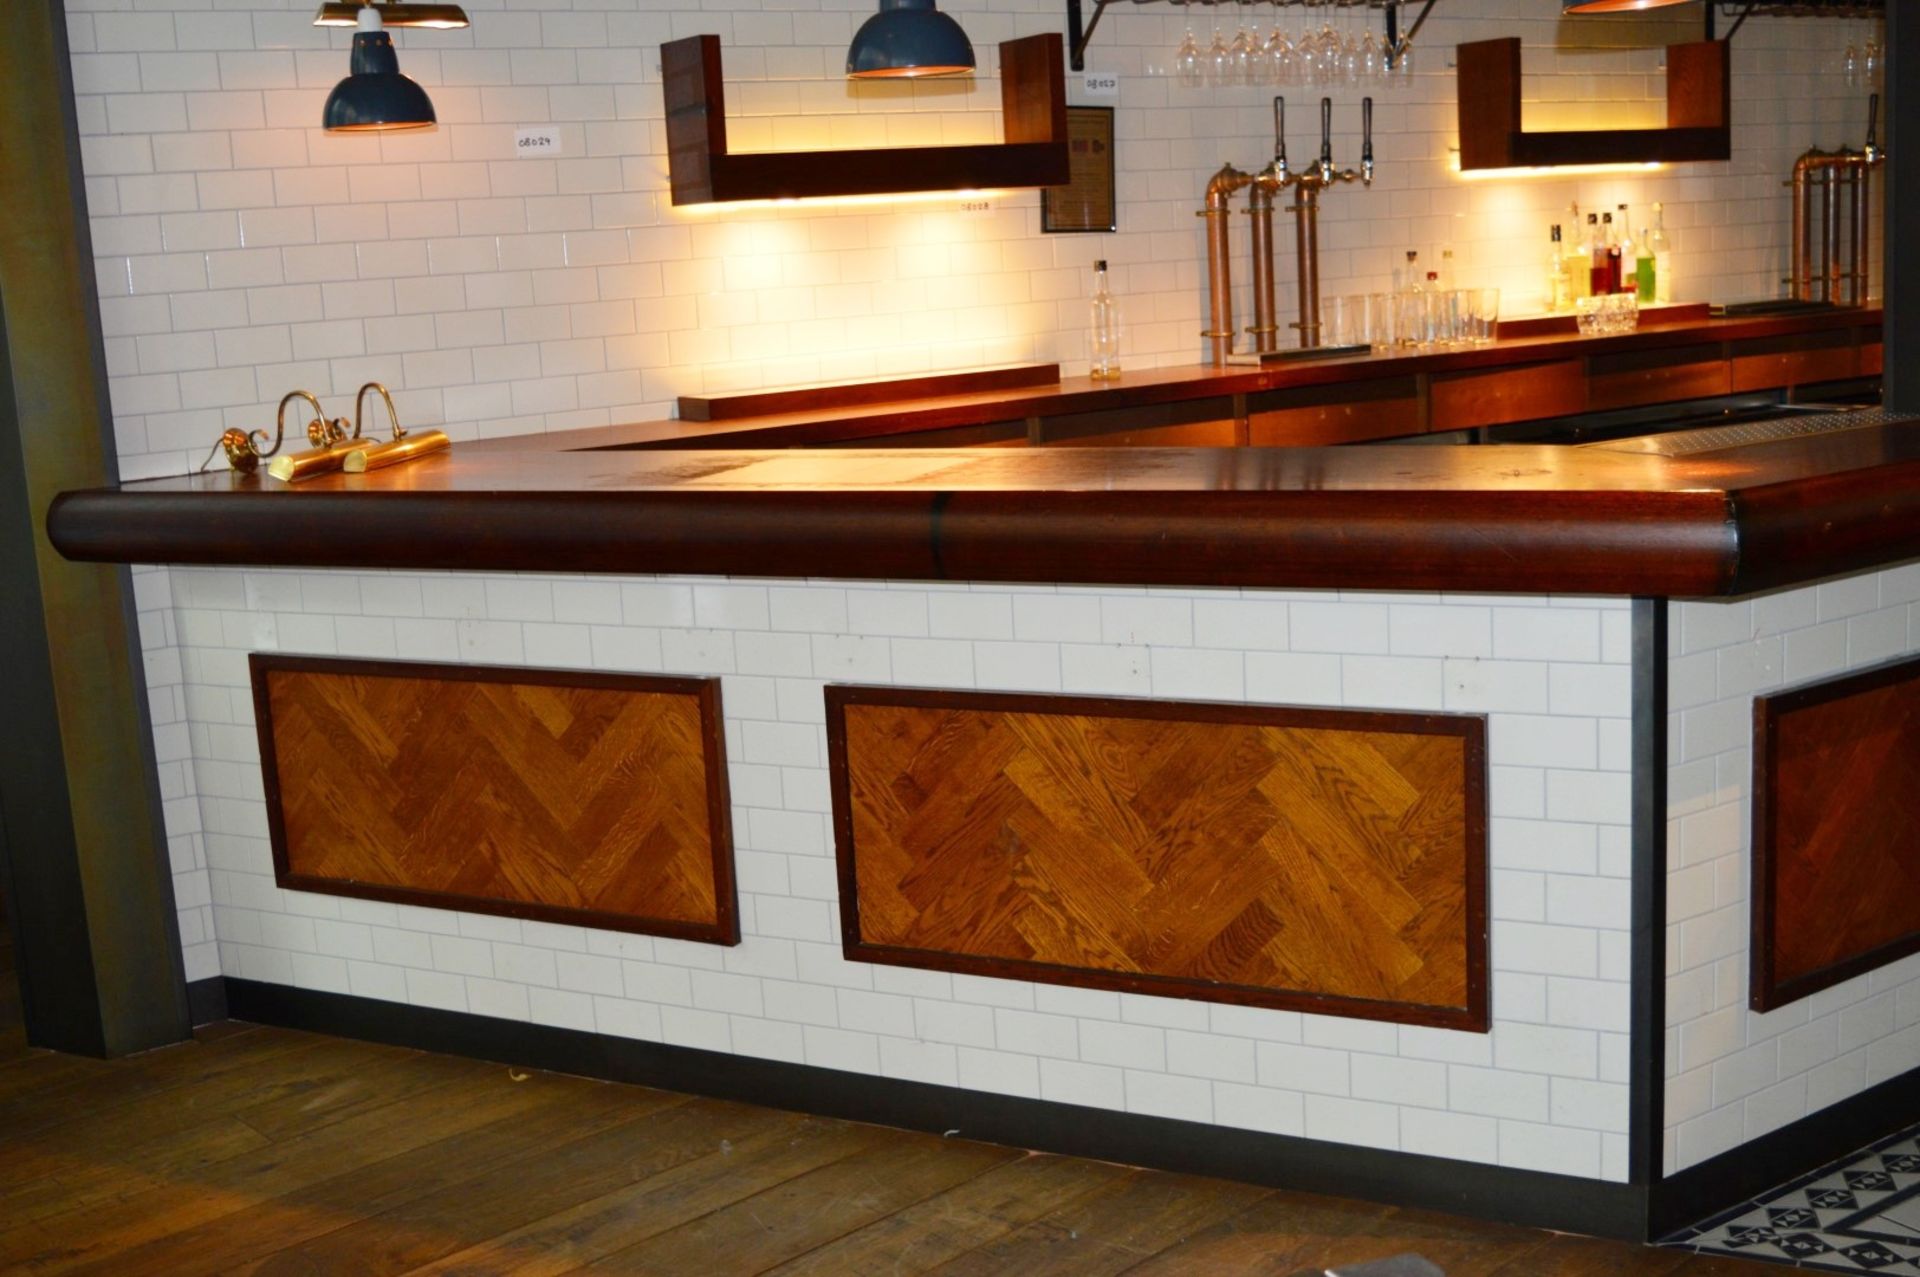 1 x Large Pub / Restuarant Bar With Tiled Front and Framed Parquet Flooring Design - Also Includes - Image 23 of 25